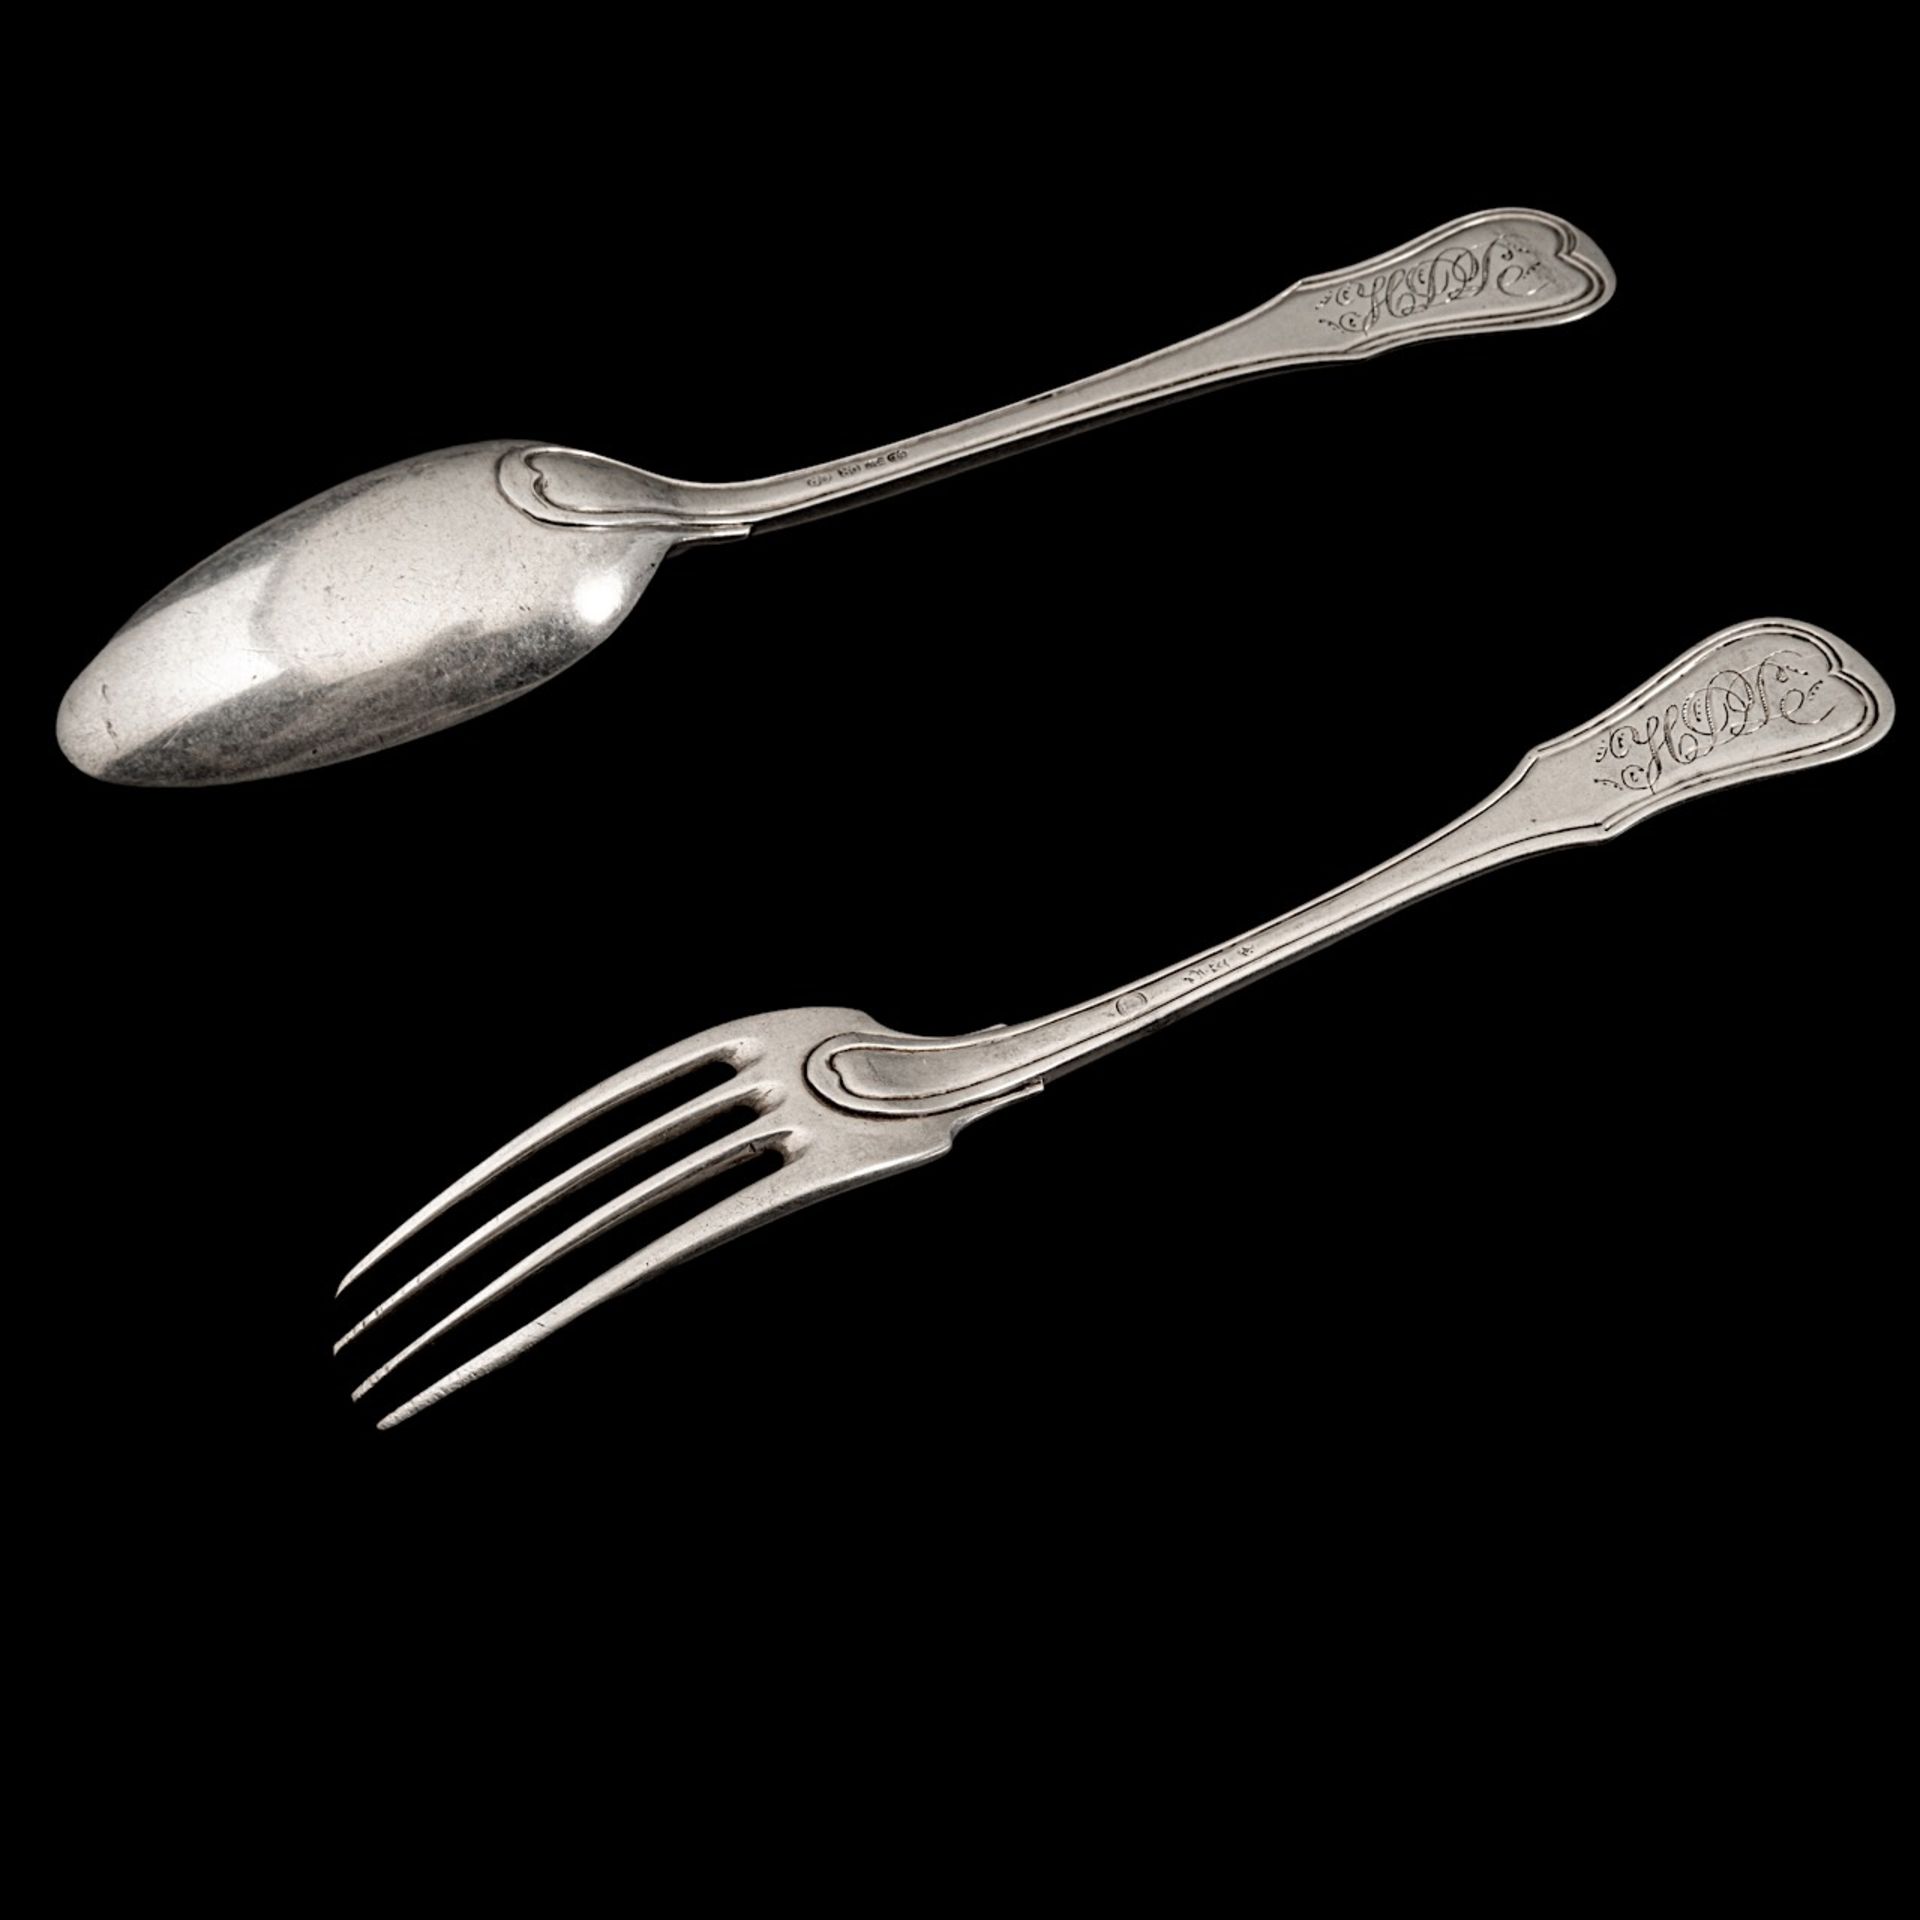 A late 18thC set of 17 forks and 18 spoons, Louvain and other hallmarks, weight: ca 2434 g - Image 4 of 6